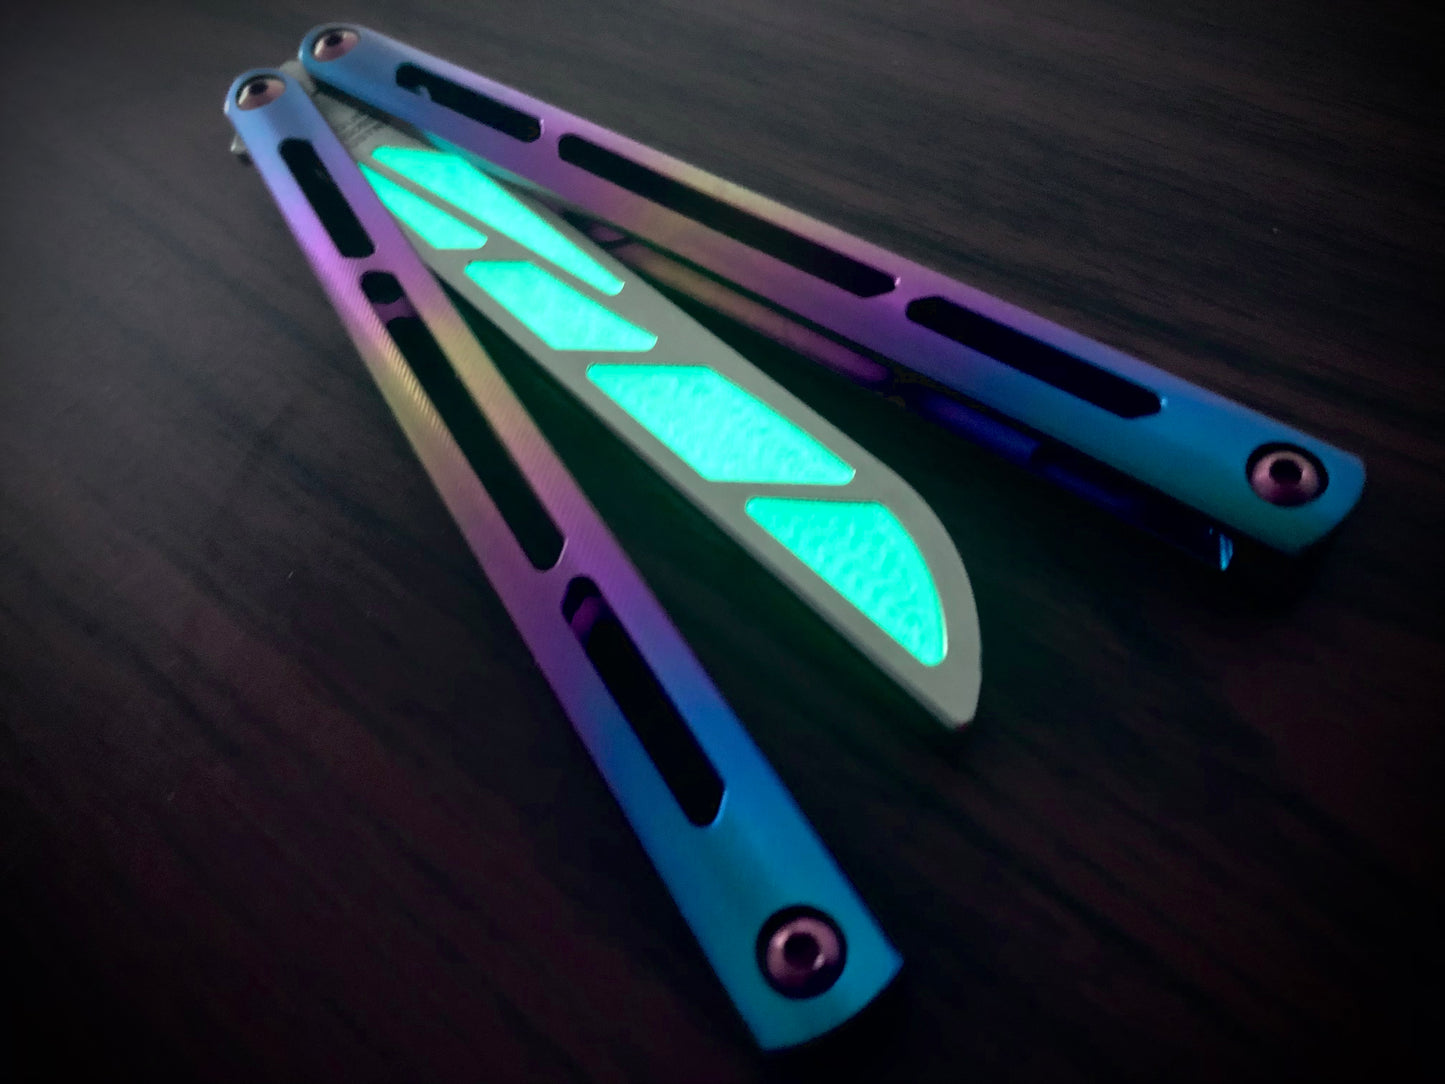 Adjust the balance and add a pop of color to your Squid Industries Tsunami trainer balisong with this custom-made Zippy balance insert. The insert adds 0.067 oz to the blade, which enable the Tsunami trainer to have a more neutral (less handle biased) balance profile.